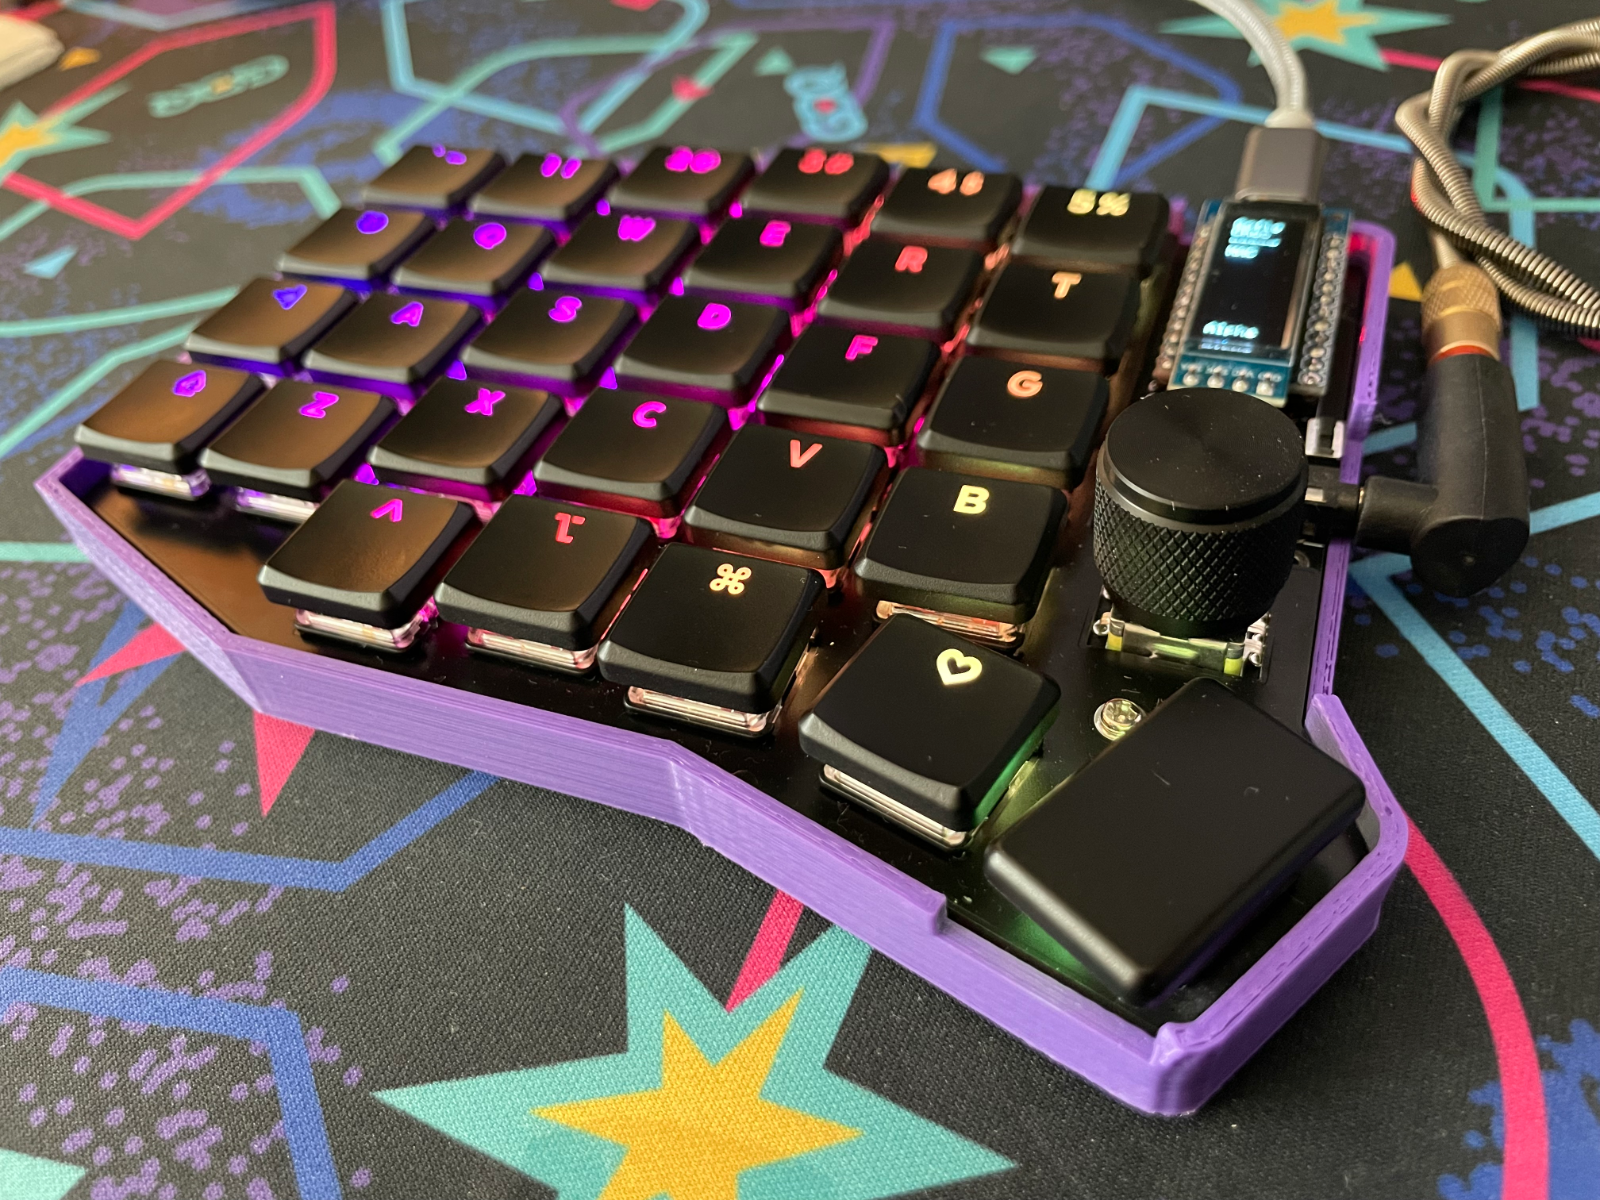 A Review of the Sofle Choc (Or: A Slow Decent Into Mechanical Keyboard Nerdery)